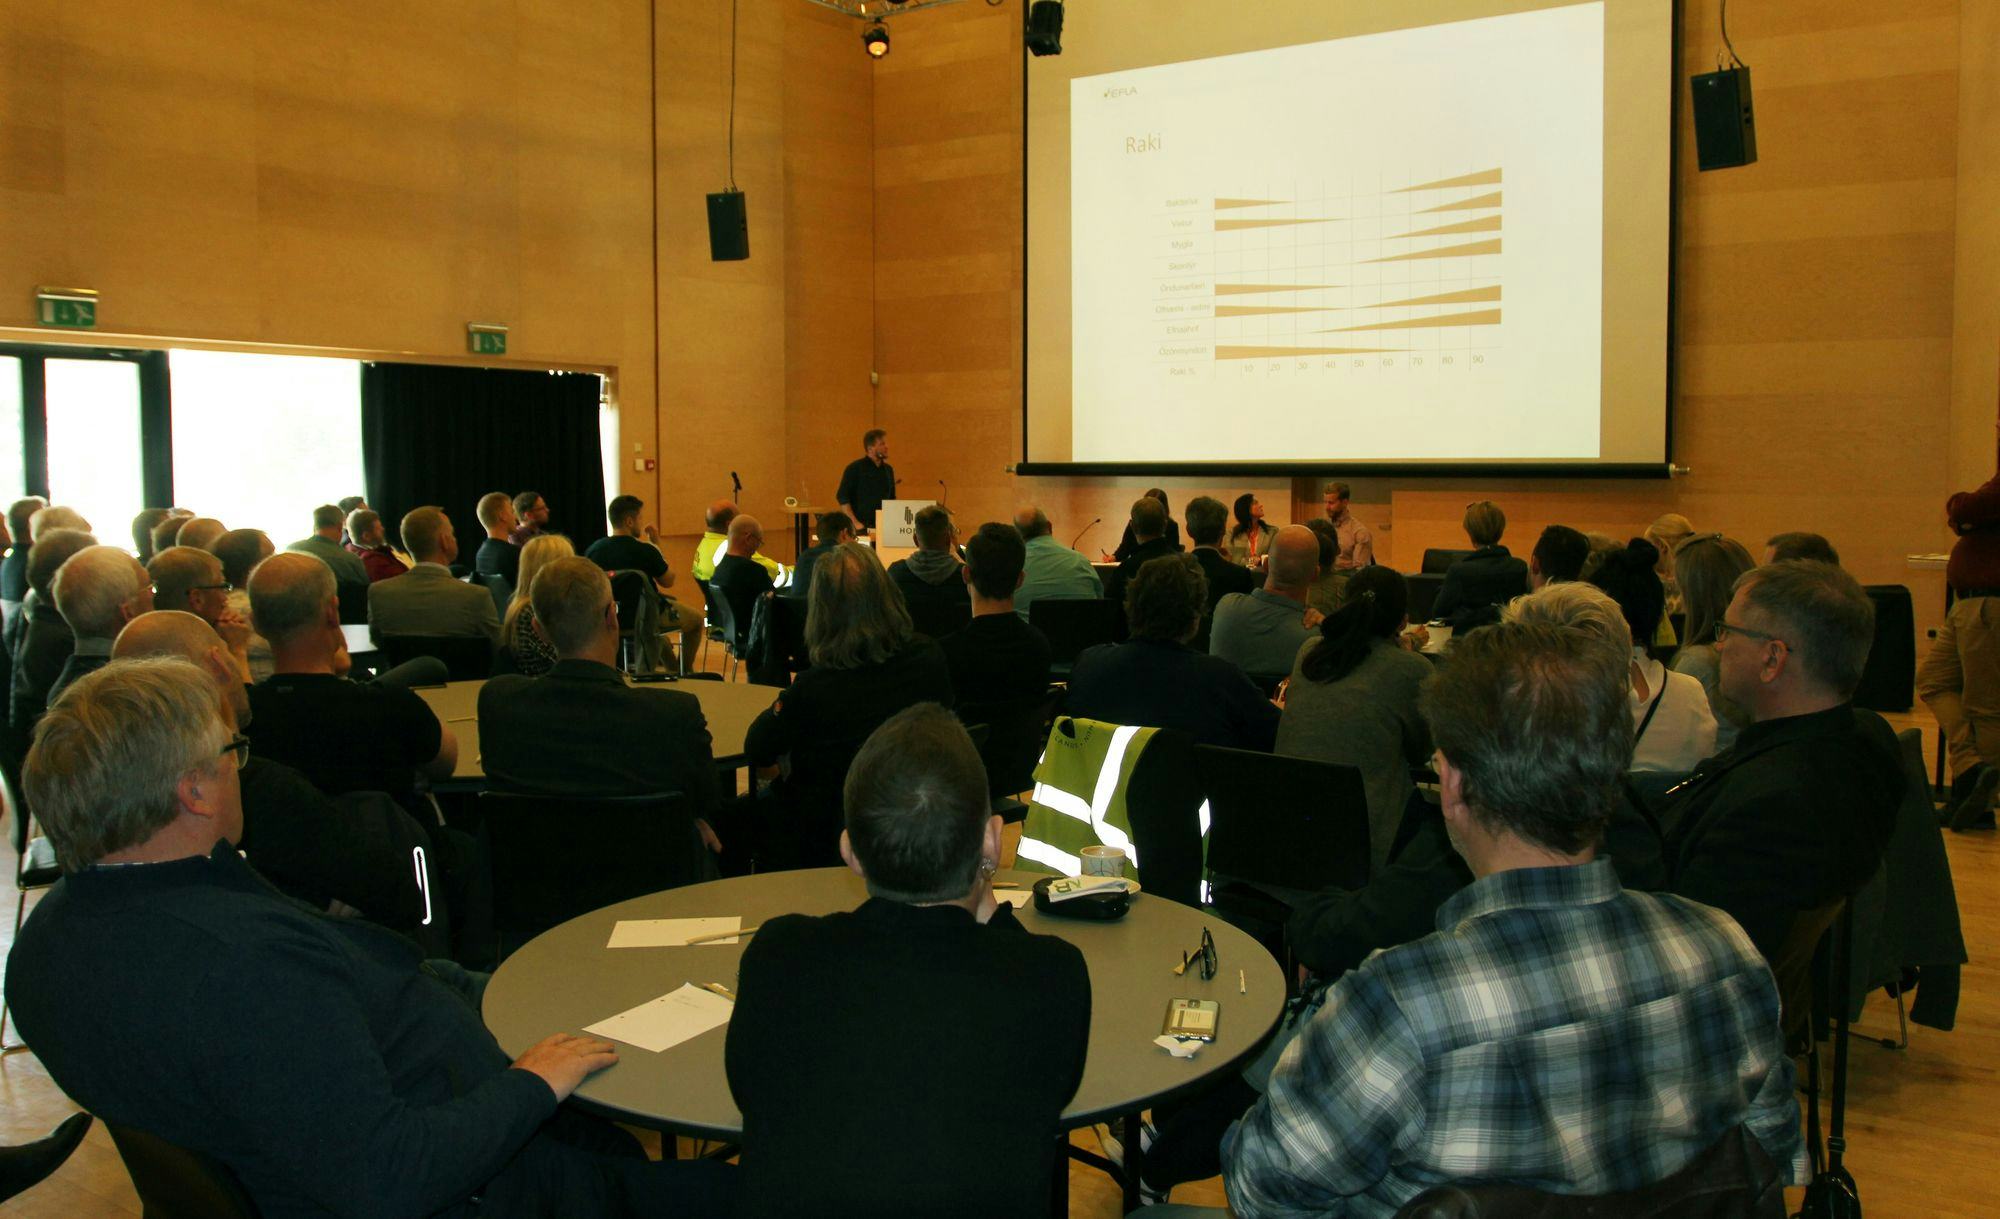 A back view of audiences in a conference room 